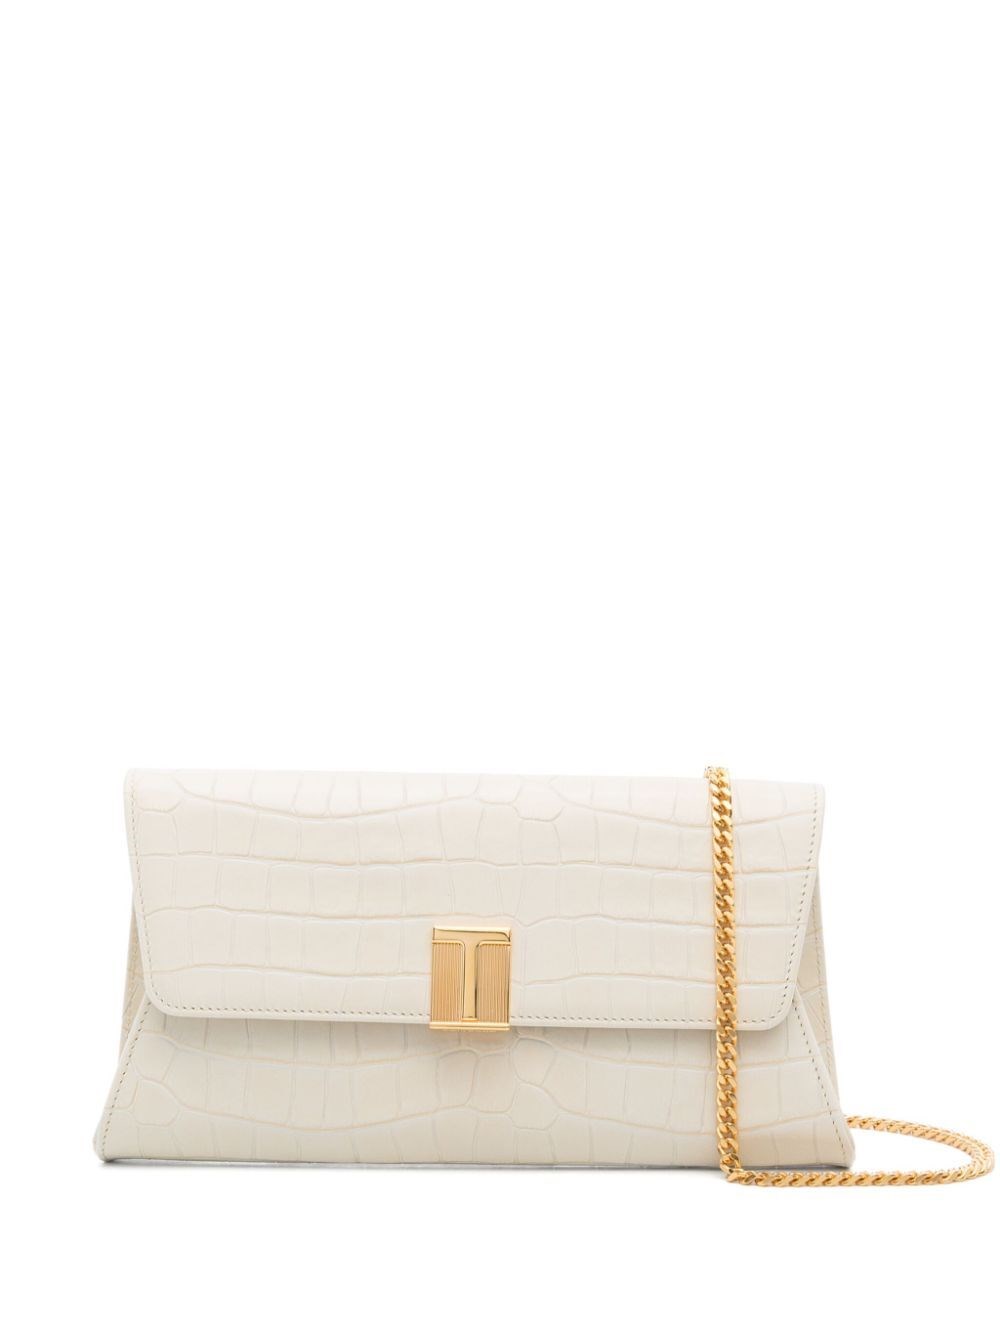 Tom Ford Noble Clutch Bag In Nude & Neutrals